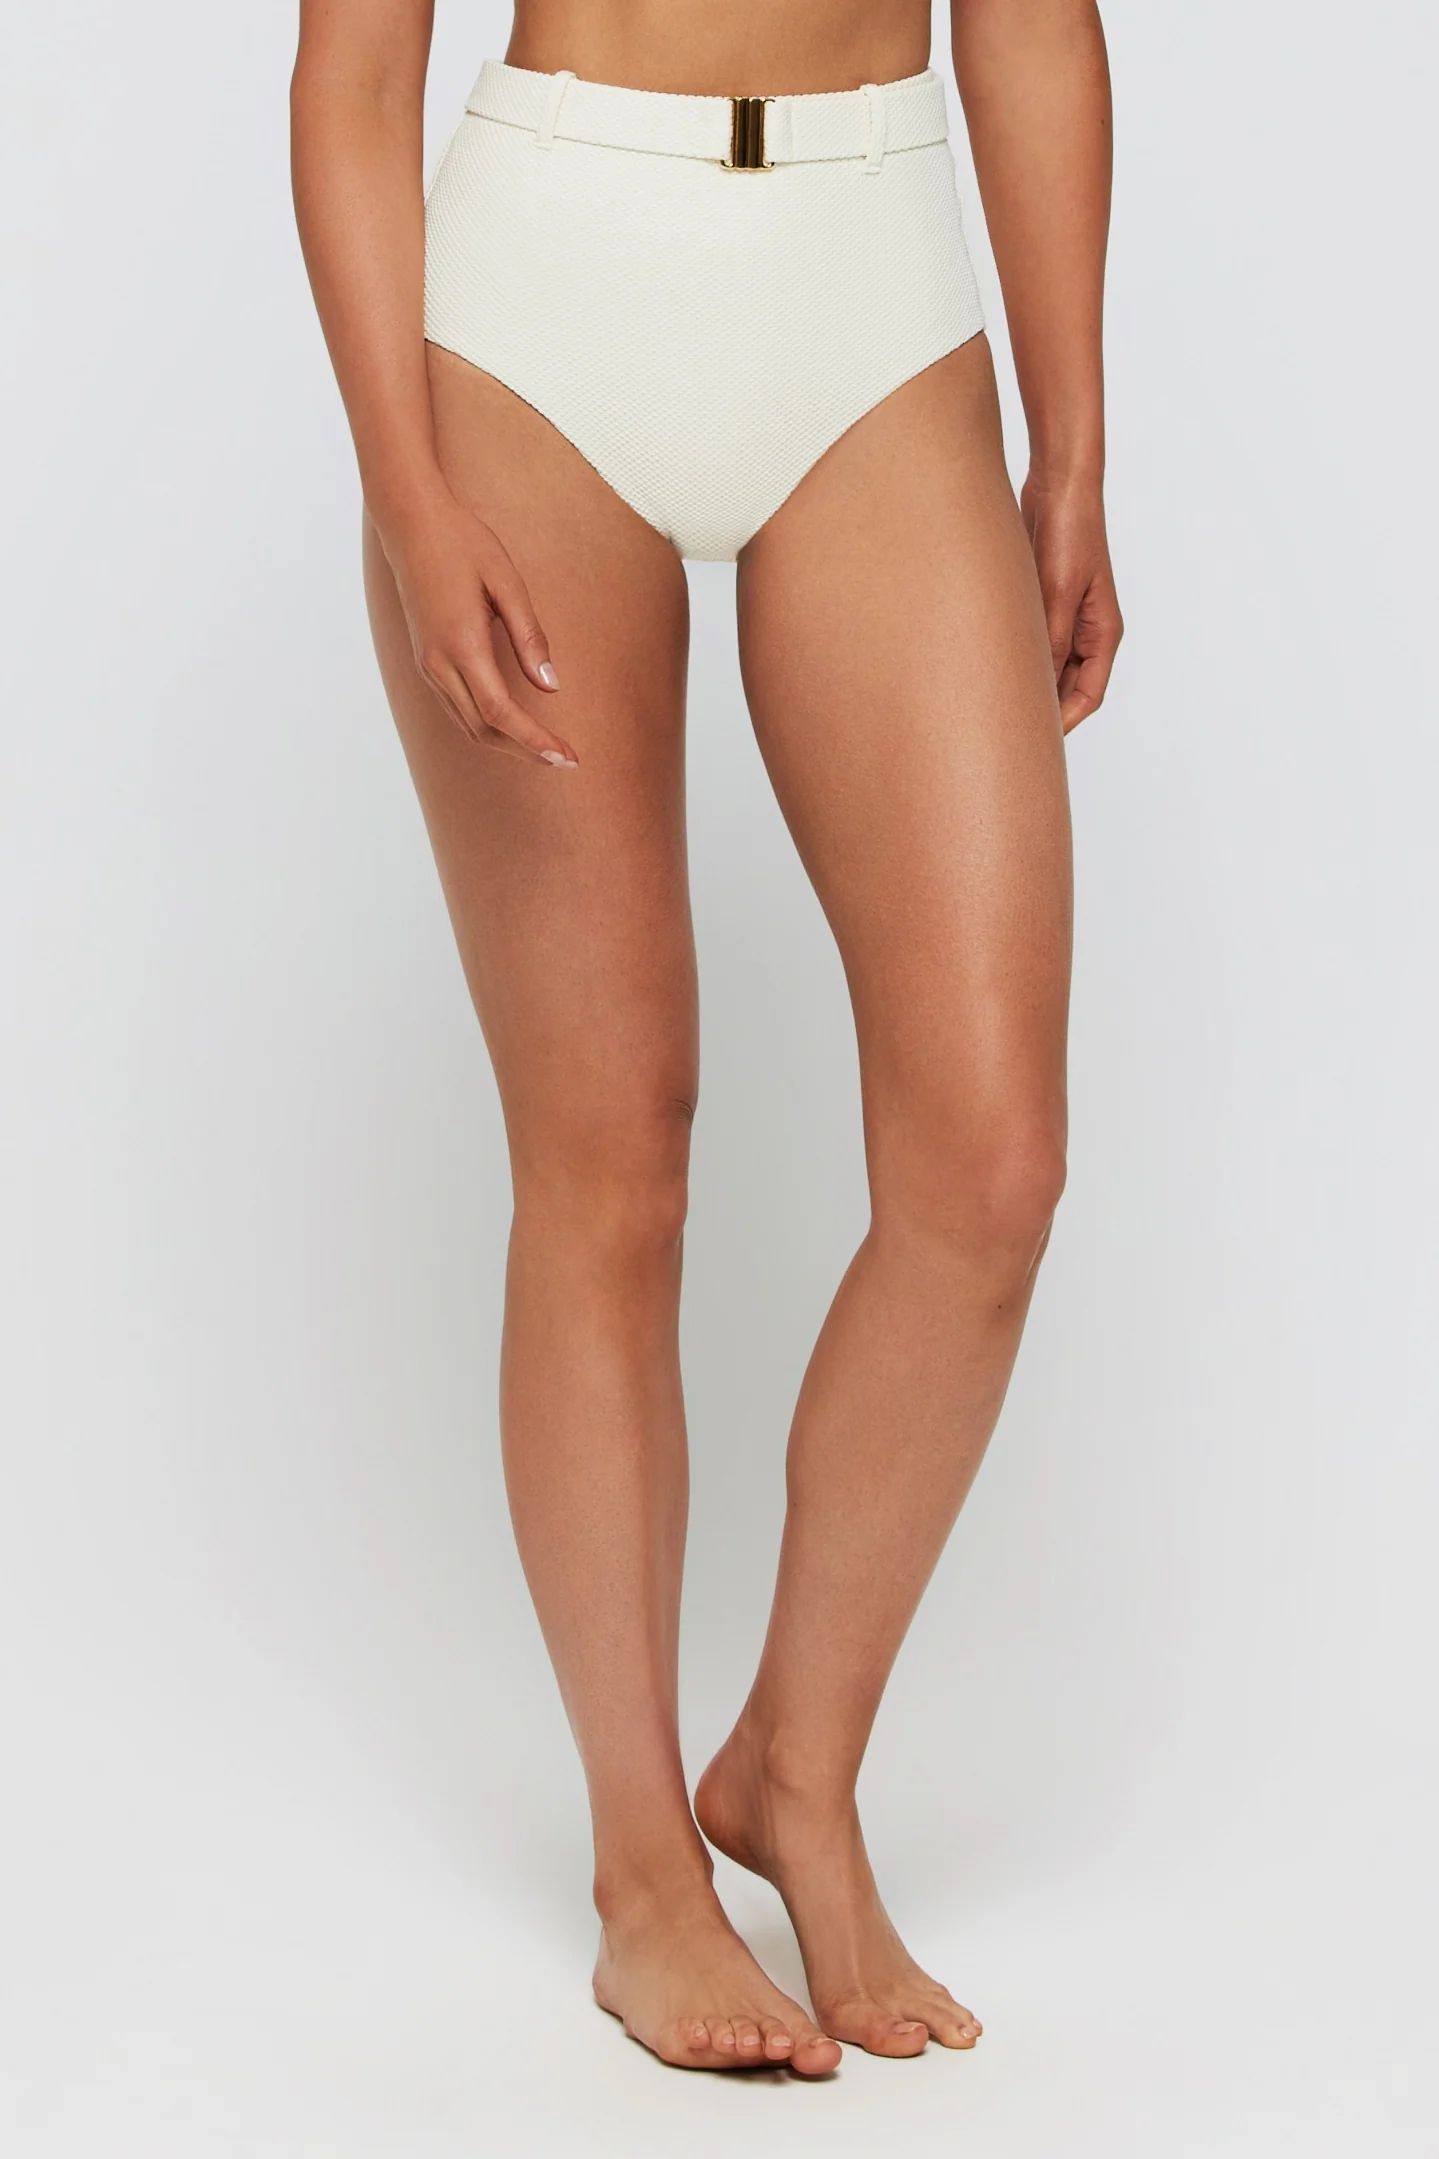 Lucia Two-Piece Swimsuit Bottom | Hermoza